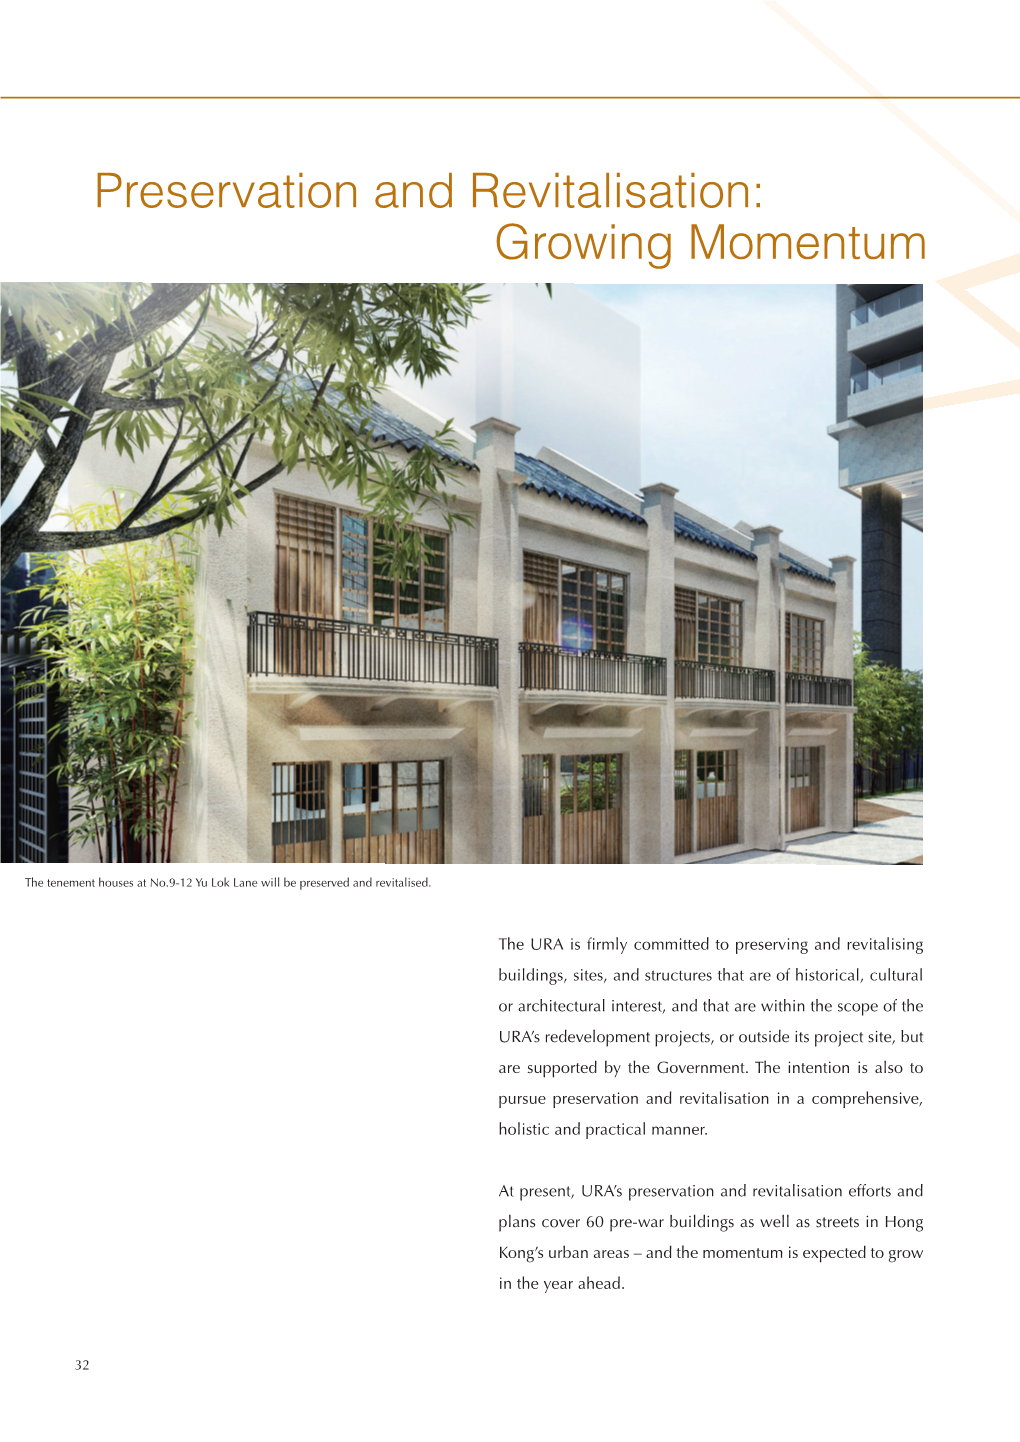 Preservation and Revitalisation: Growing Momentum